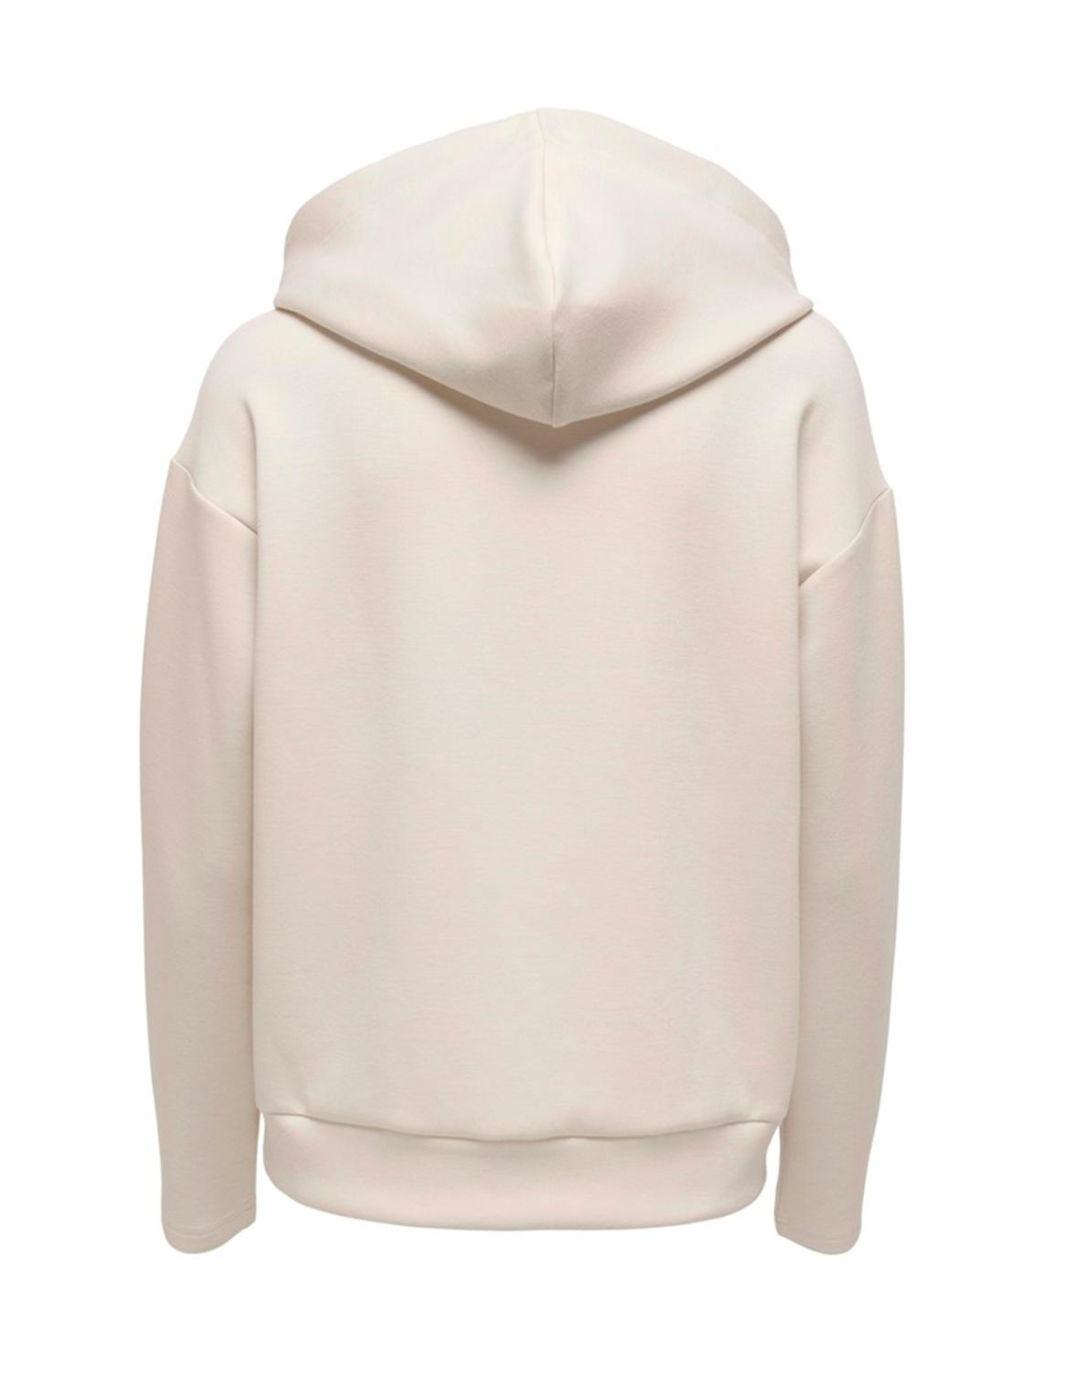 Sudadera Only New beige de mujer-b